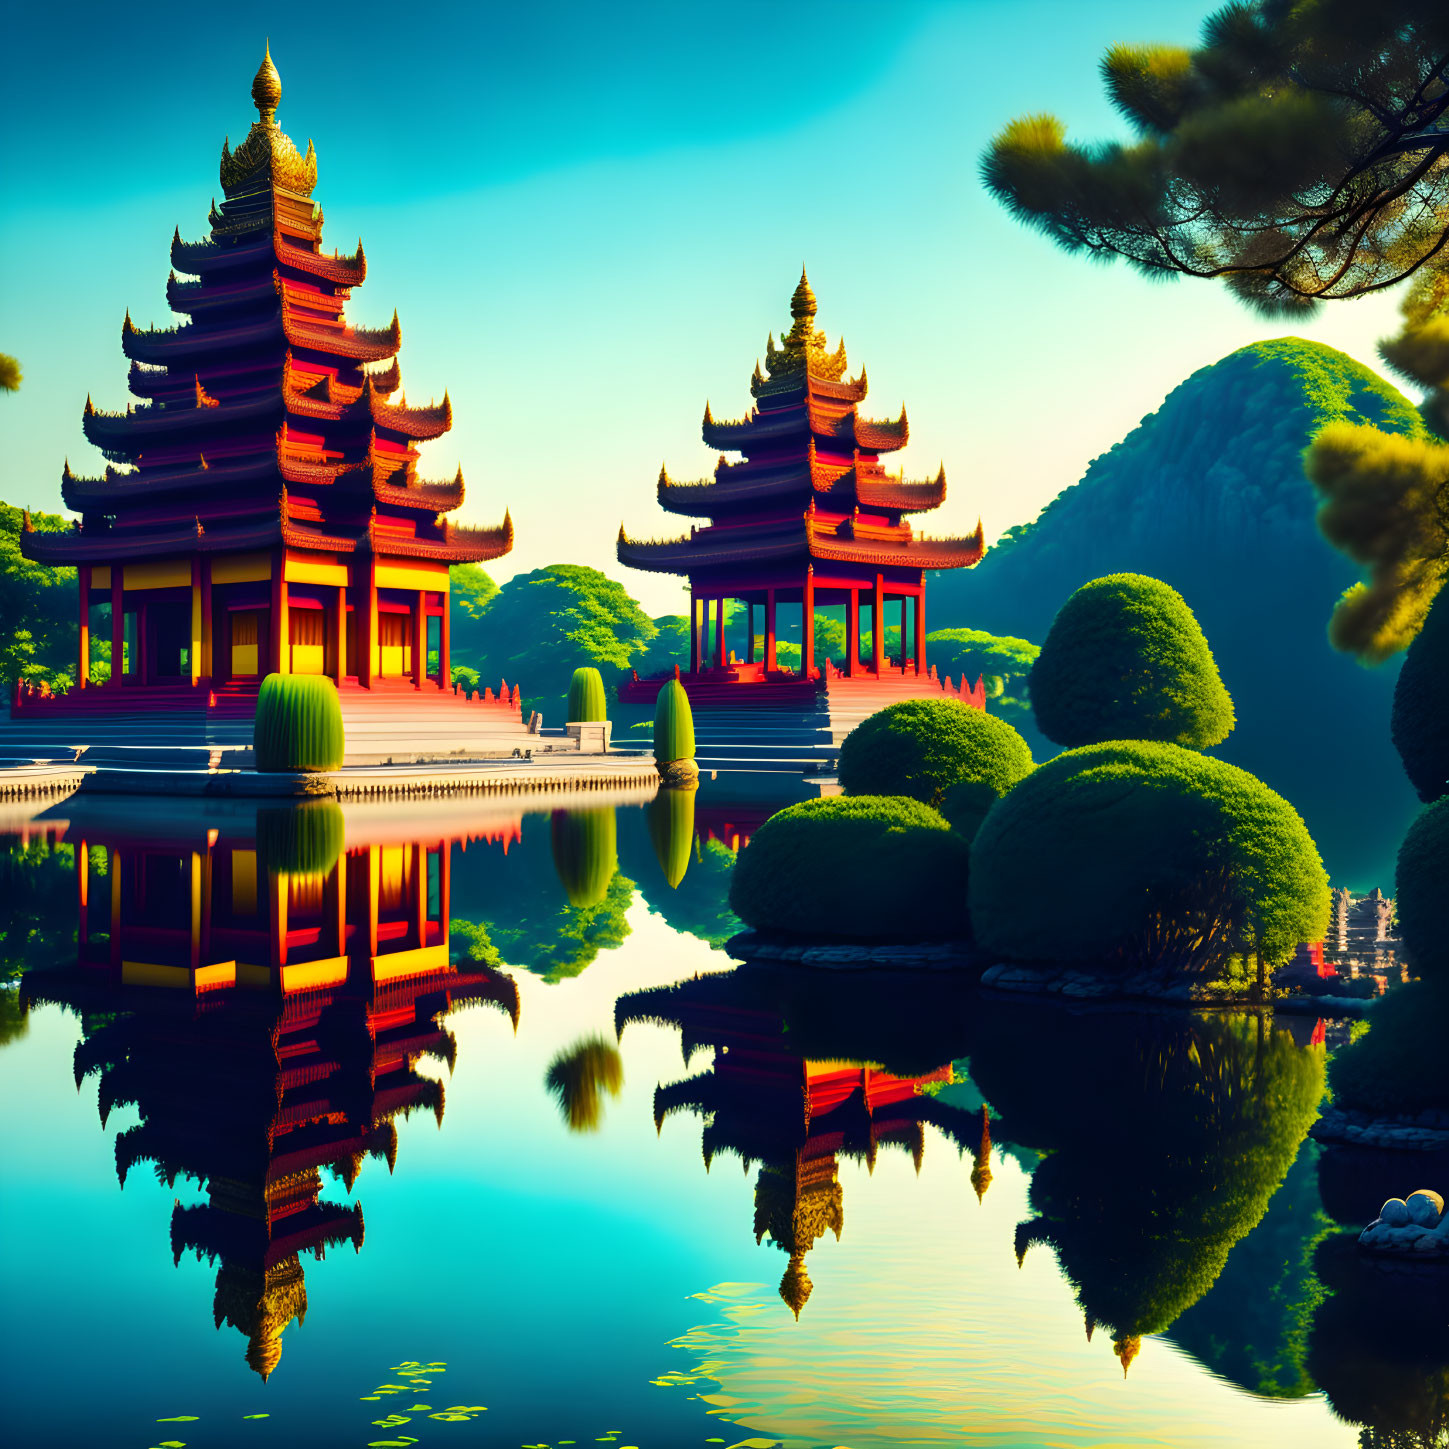 Traditional Asian pagodas by a calm lake in serene landscape